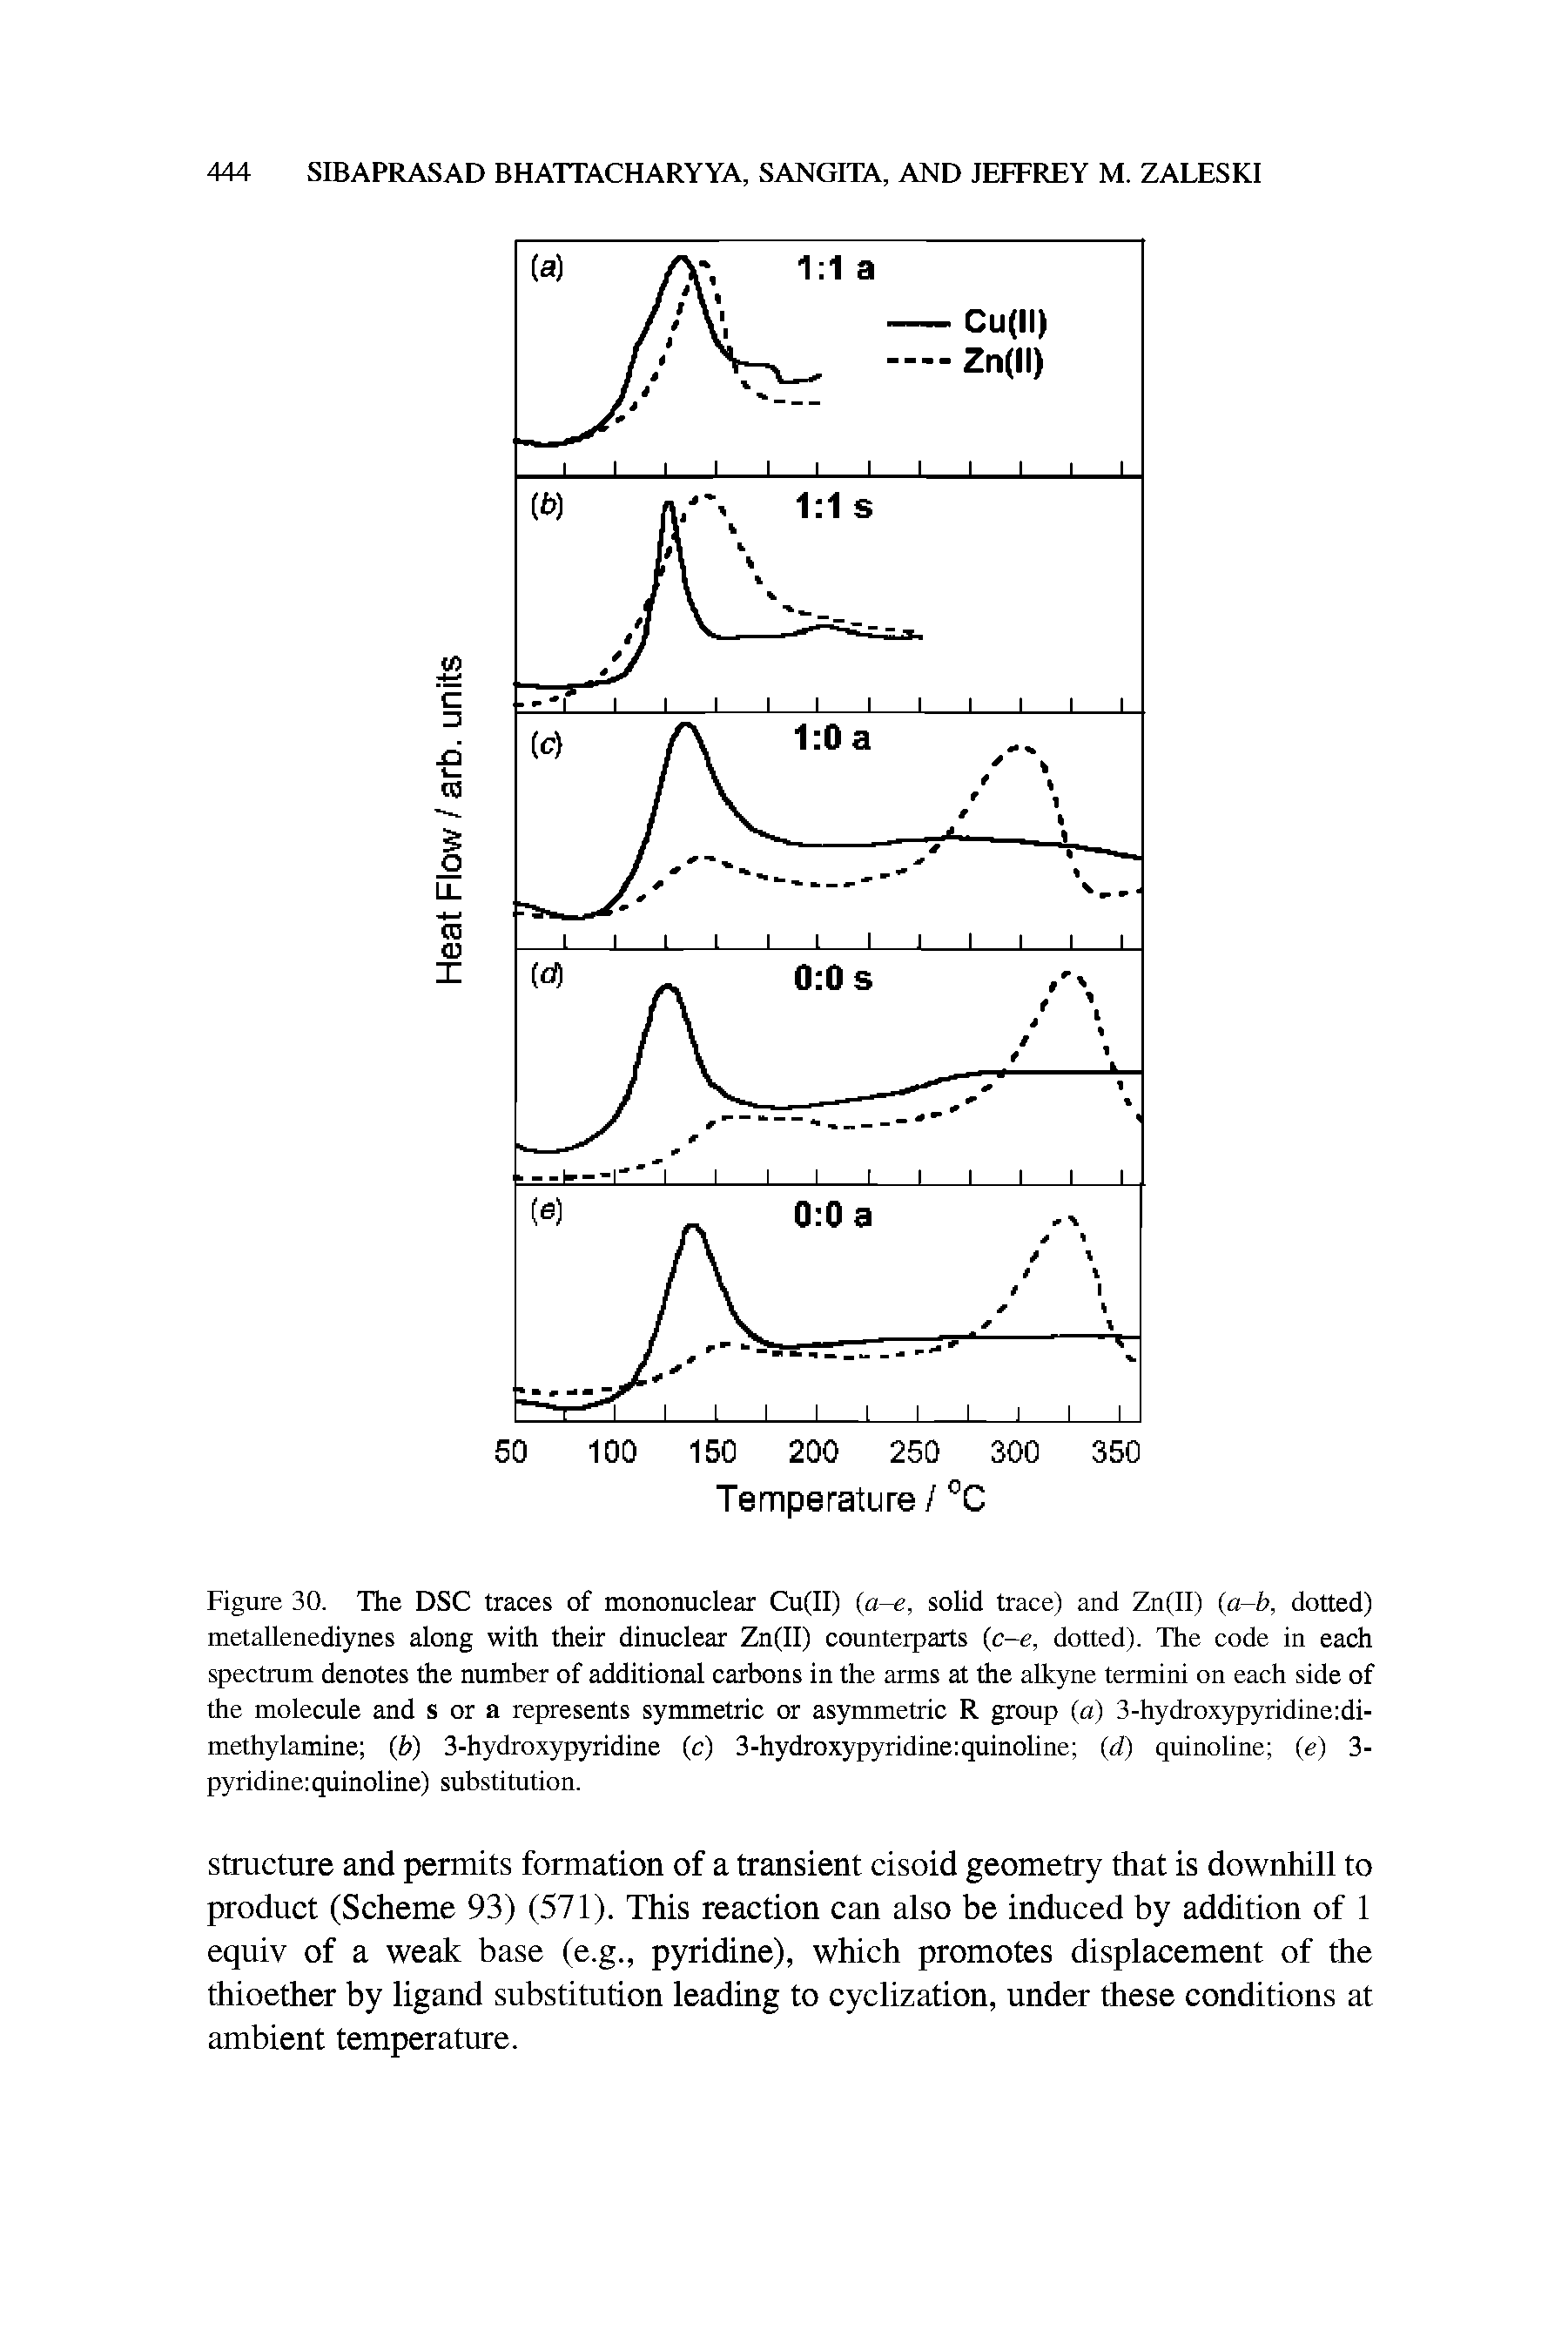 Figure 30. The DSC traces of mononuclear Cu(II) (a-e, solid trace) and Zn(ll) (a-b, dotted) metaUenediynes along with their dinuclear Zn(II) counterparts (c-e, dotted). The code in each spectrum denotes the number of additional carbons in the arms at the aUcyne termini on each side of the molecule and s or a represents symmetric or asymmetric R group (a) 3-hydroxypyridine di-methylamine b) 3-hydroxypyridine (c) 3-hydroxypyridine quinoline (d) quinoline (e) 3-pyridine quinoline) substitution.